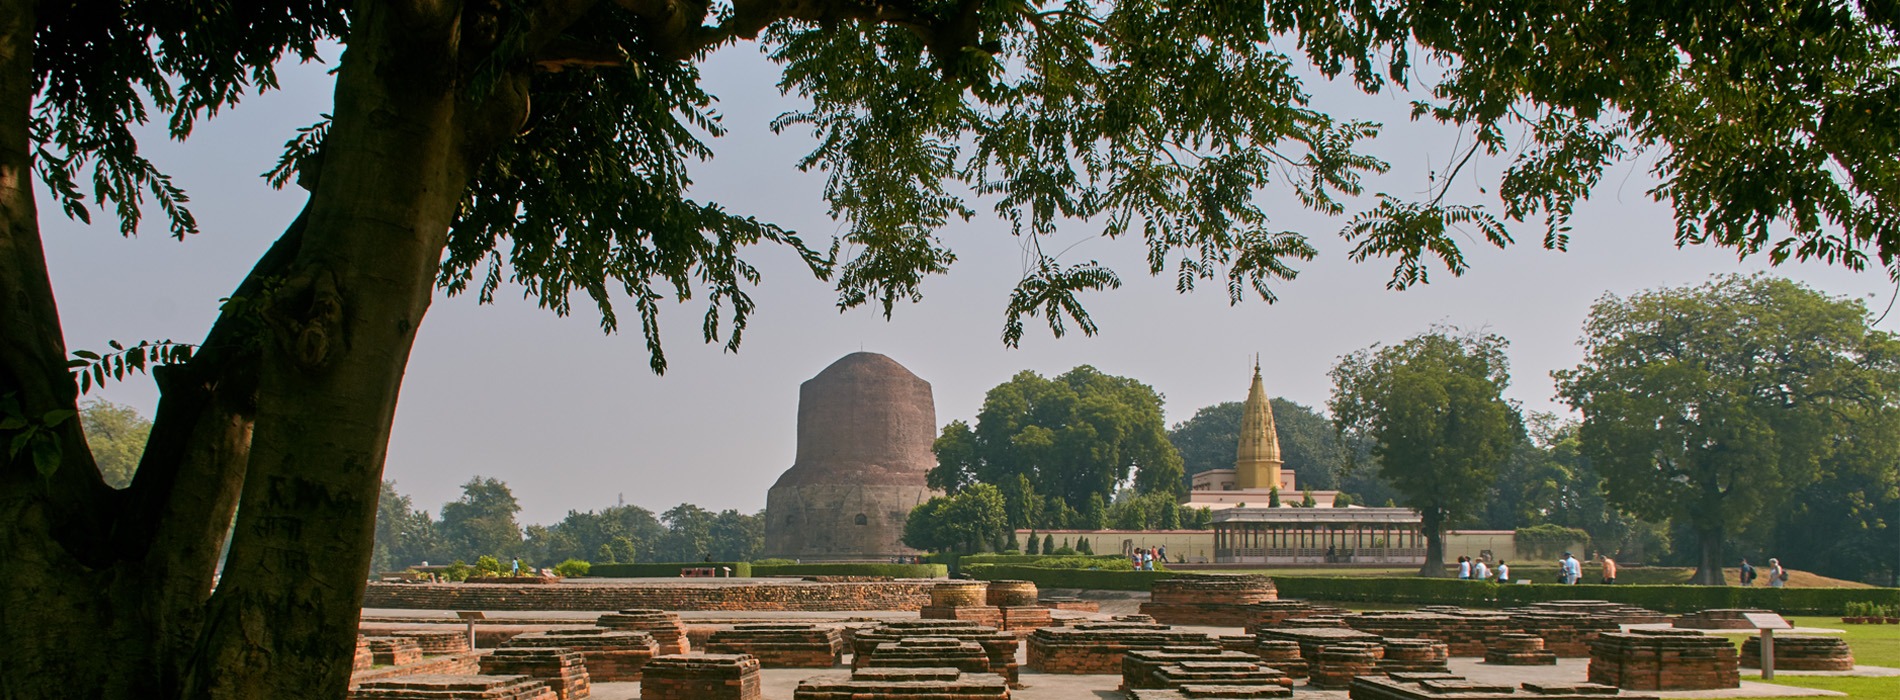 The Buddhist Circuit in India: A Guide to Major Sites